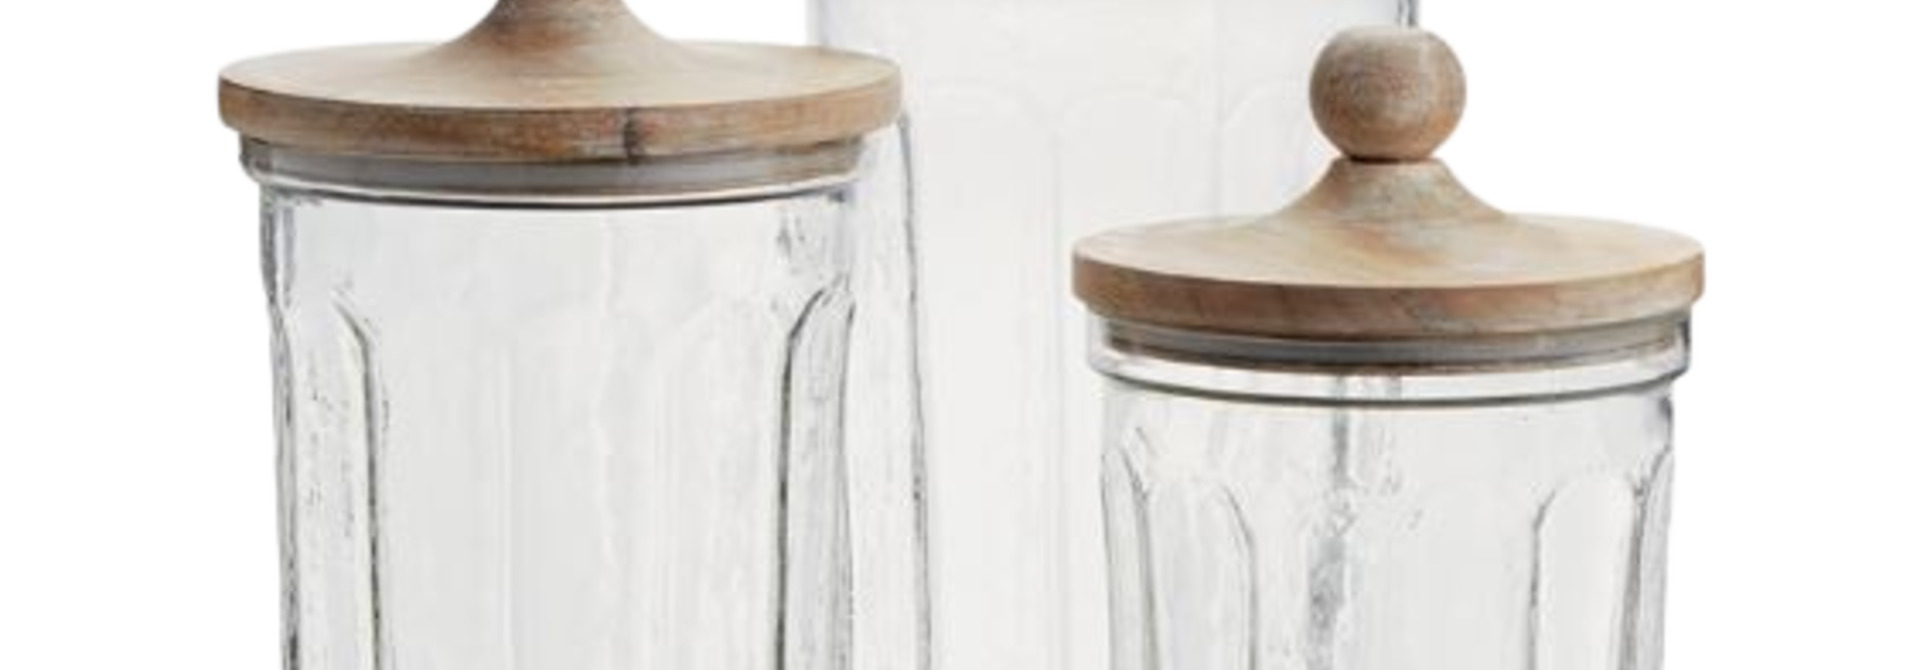 Olive Hill | The Canister Collection, Clear & Wood - 7 Inch x 7 Inch x 11 Inch